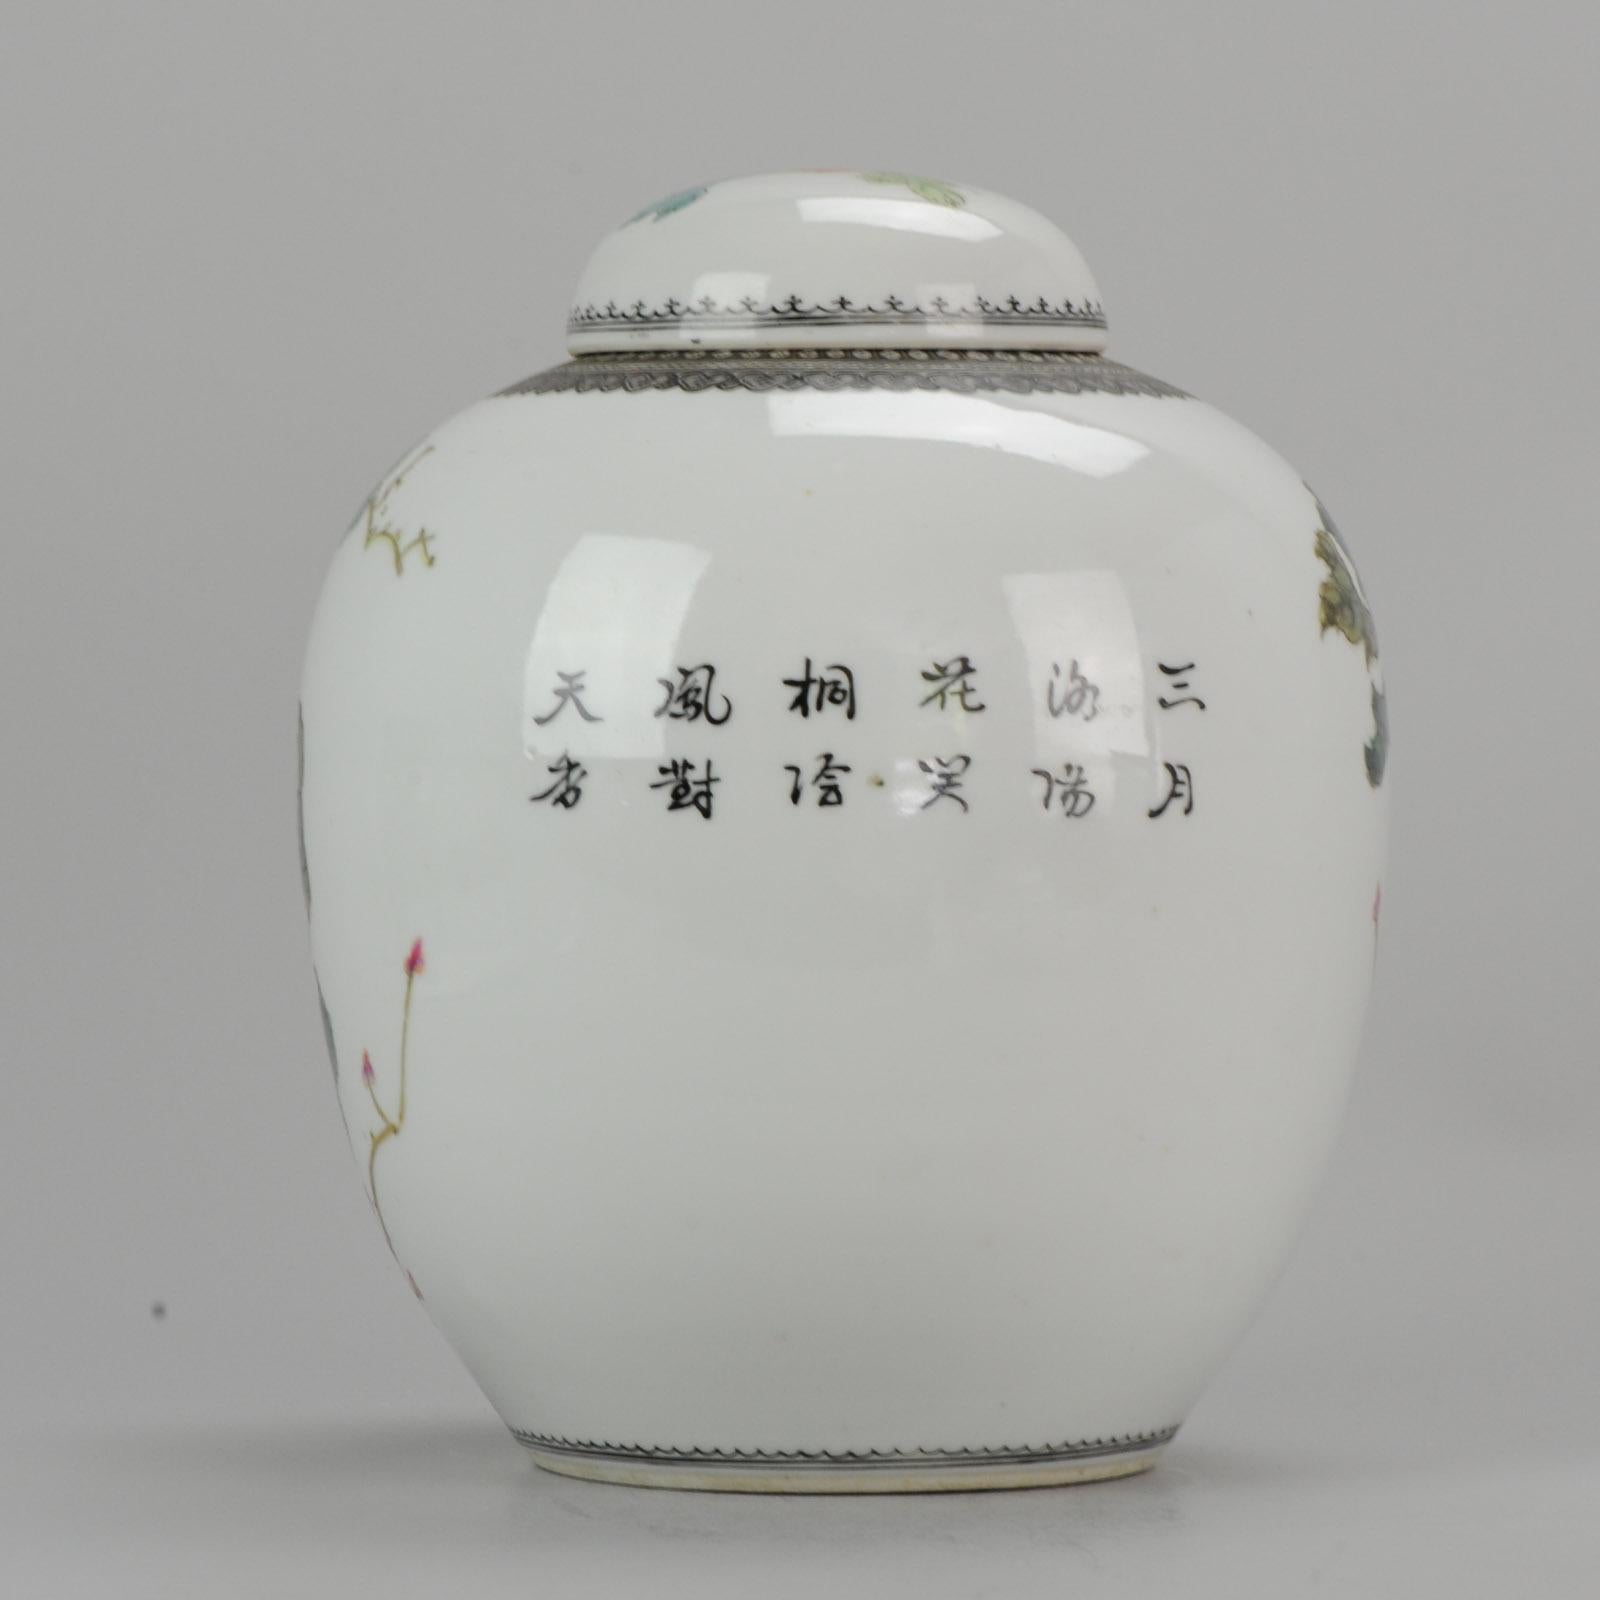 A very nicely decorated Vase / Jar with a scene of fenghuang in a landscape

Additional information:
Material: Porcelain & Pottery
Region of Origin: China
Period: 20th century PRoC (1949 - now)
Condition: Overall Condition; Perfect. 
Dimension: H 30